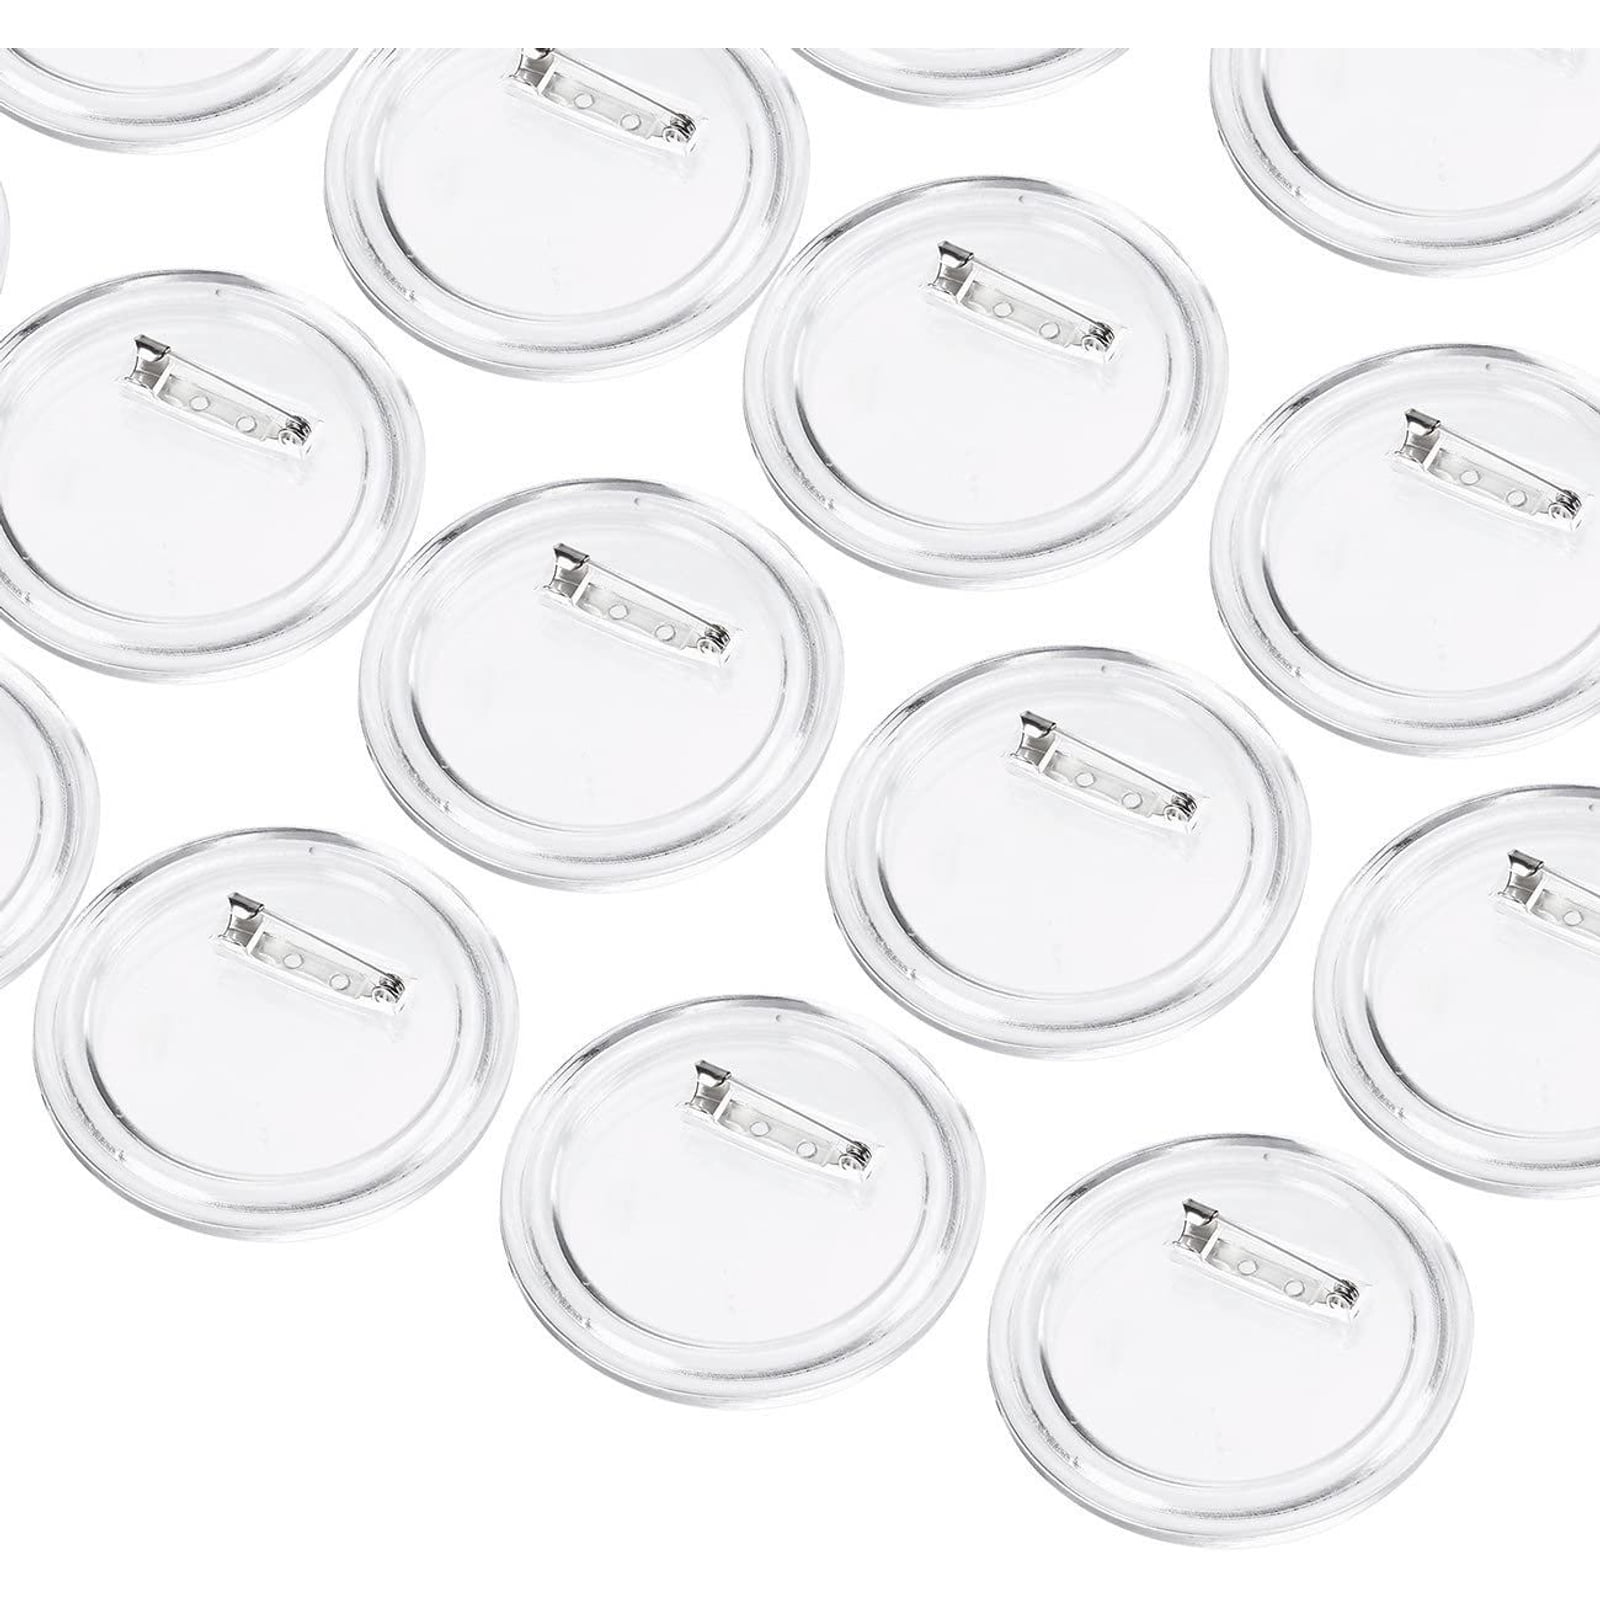 50 Pack Acrylic Design Button Badge Clear Button Pin Badges Kit for Craft Supplies 2.25Inch DIY Badges